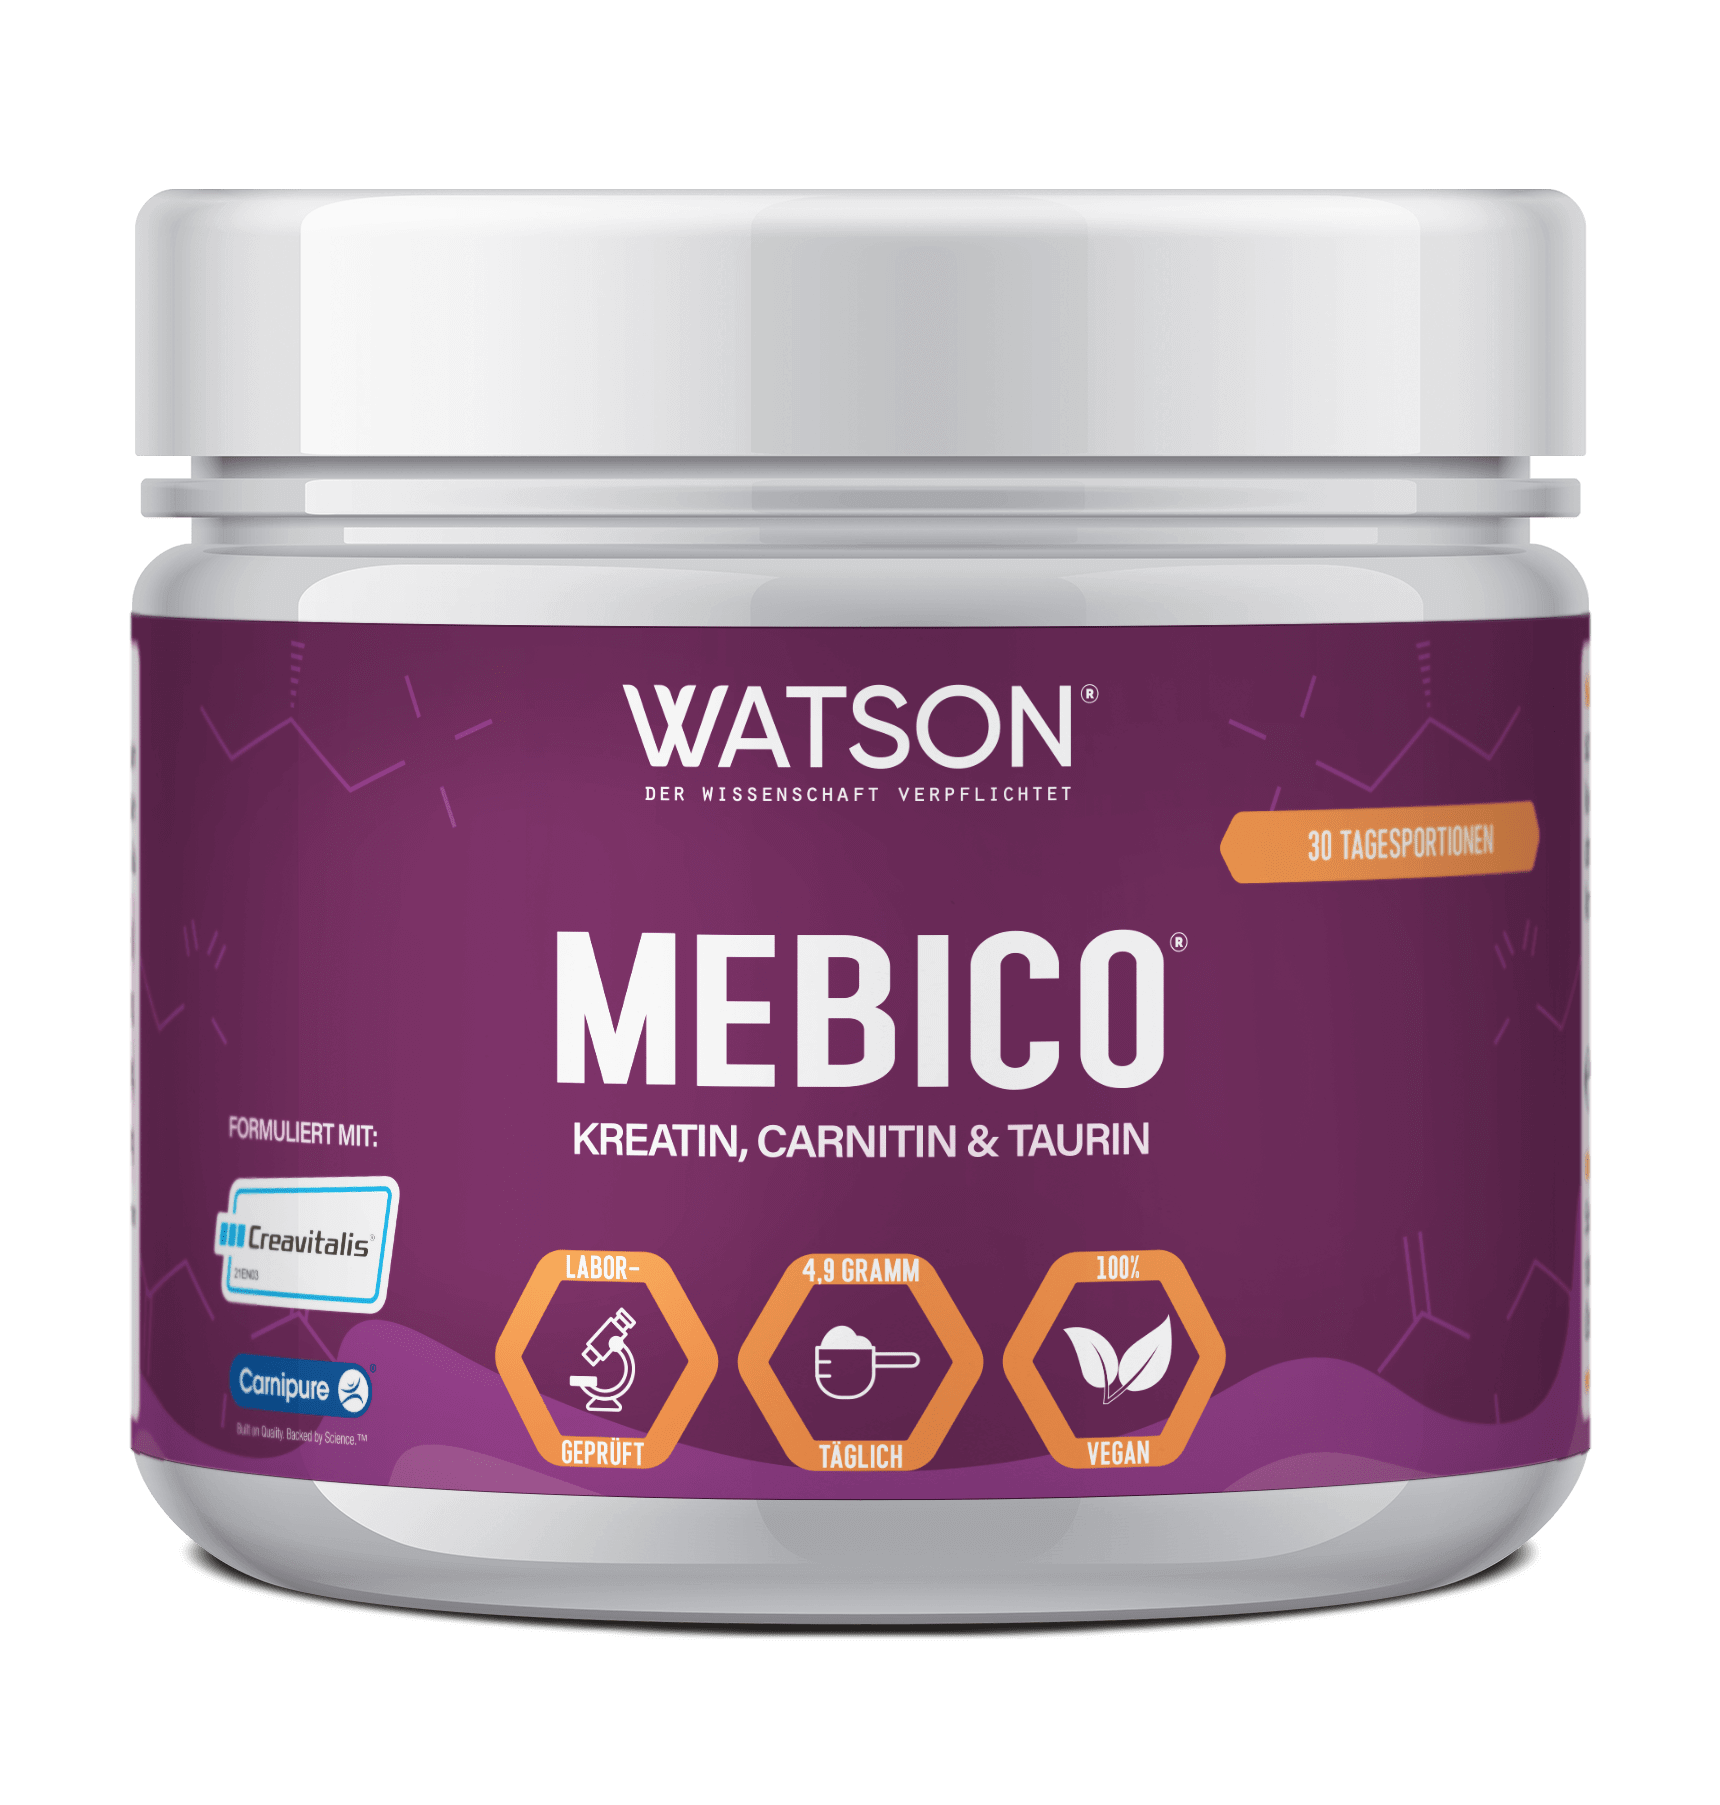 Product image of MEBICO, a white package with violet label